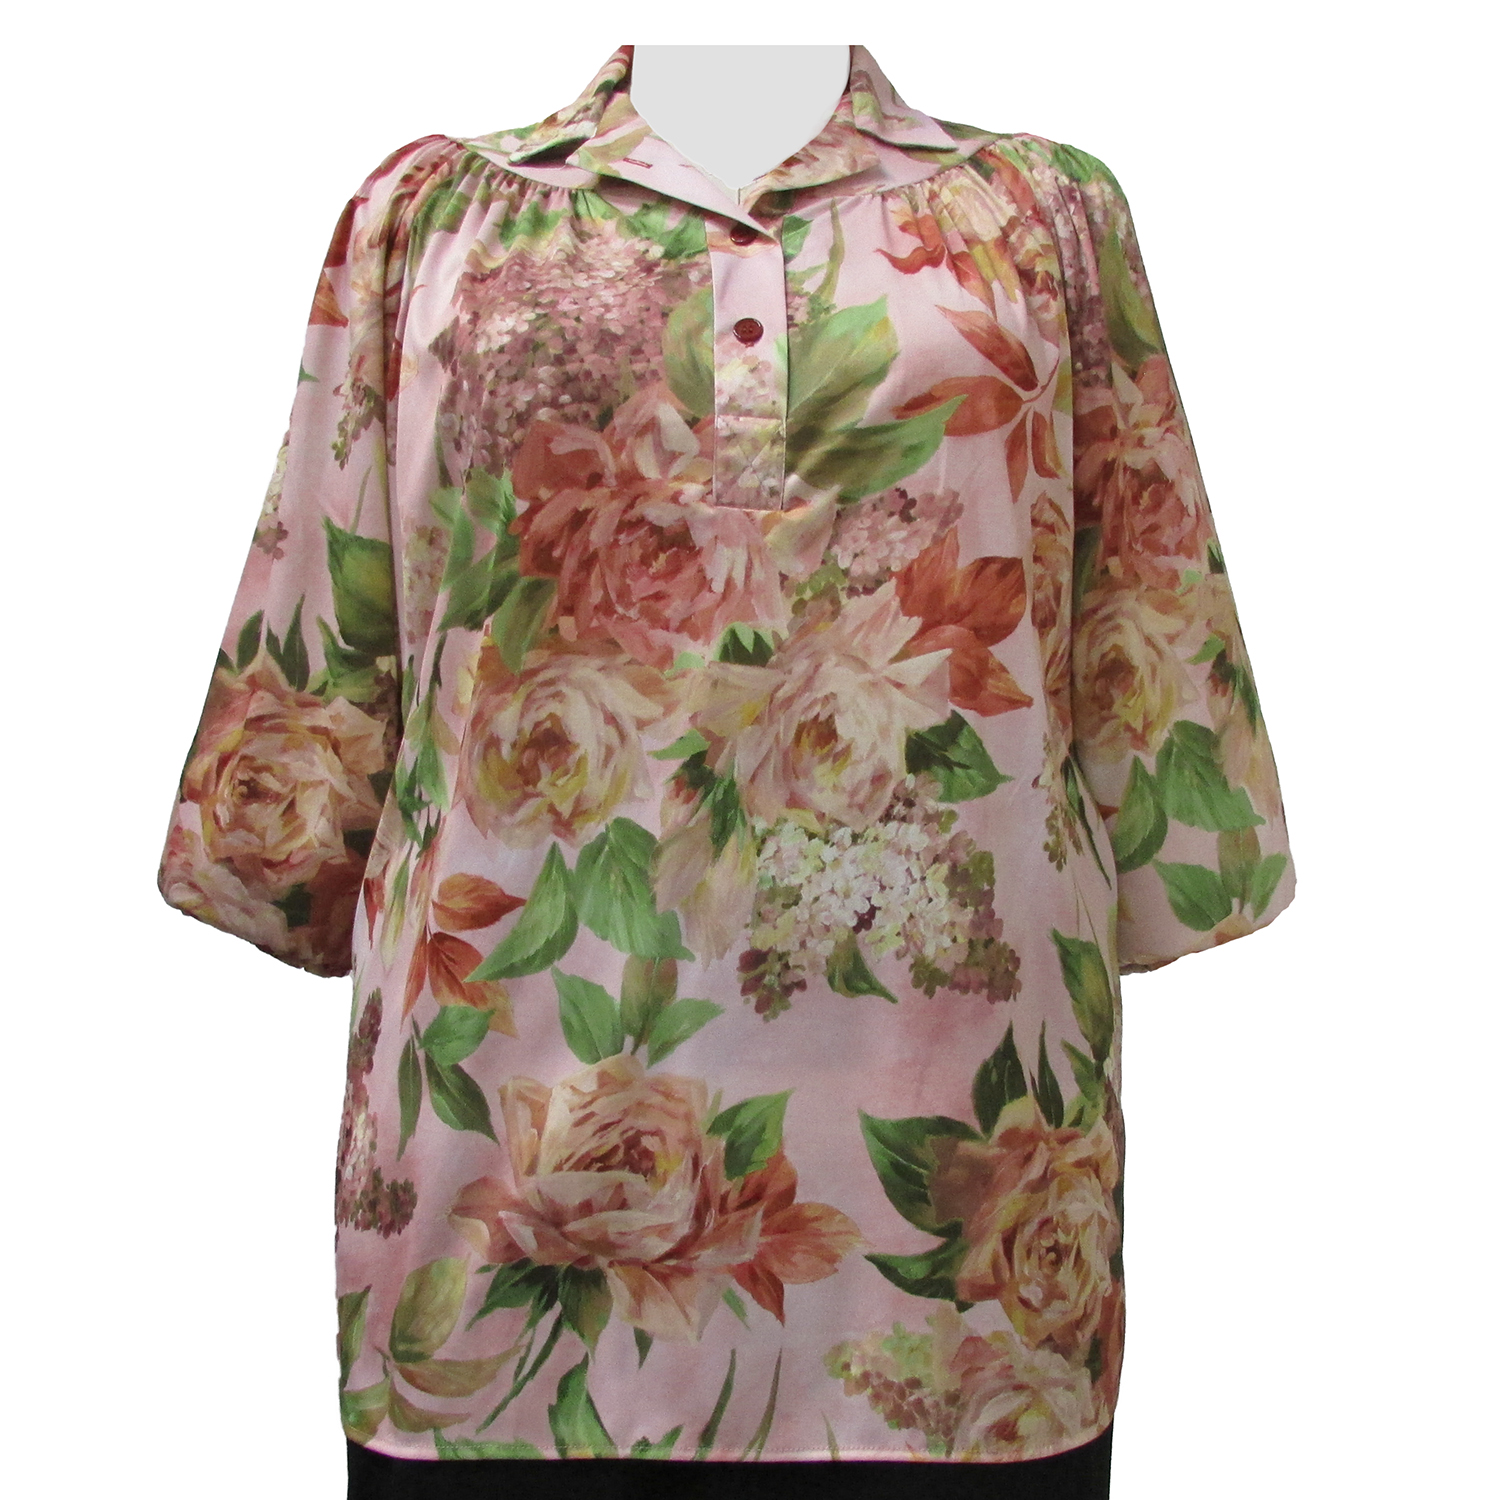 A Personal Touch Peach Floral 3/4 Sleeve Pullover Plus Size Woman's Top